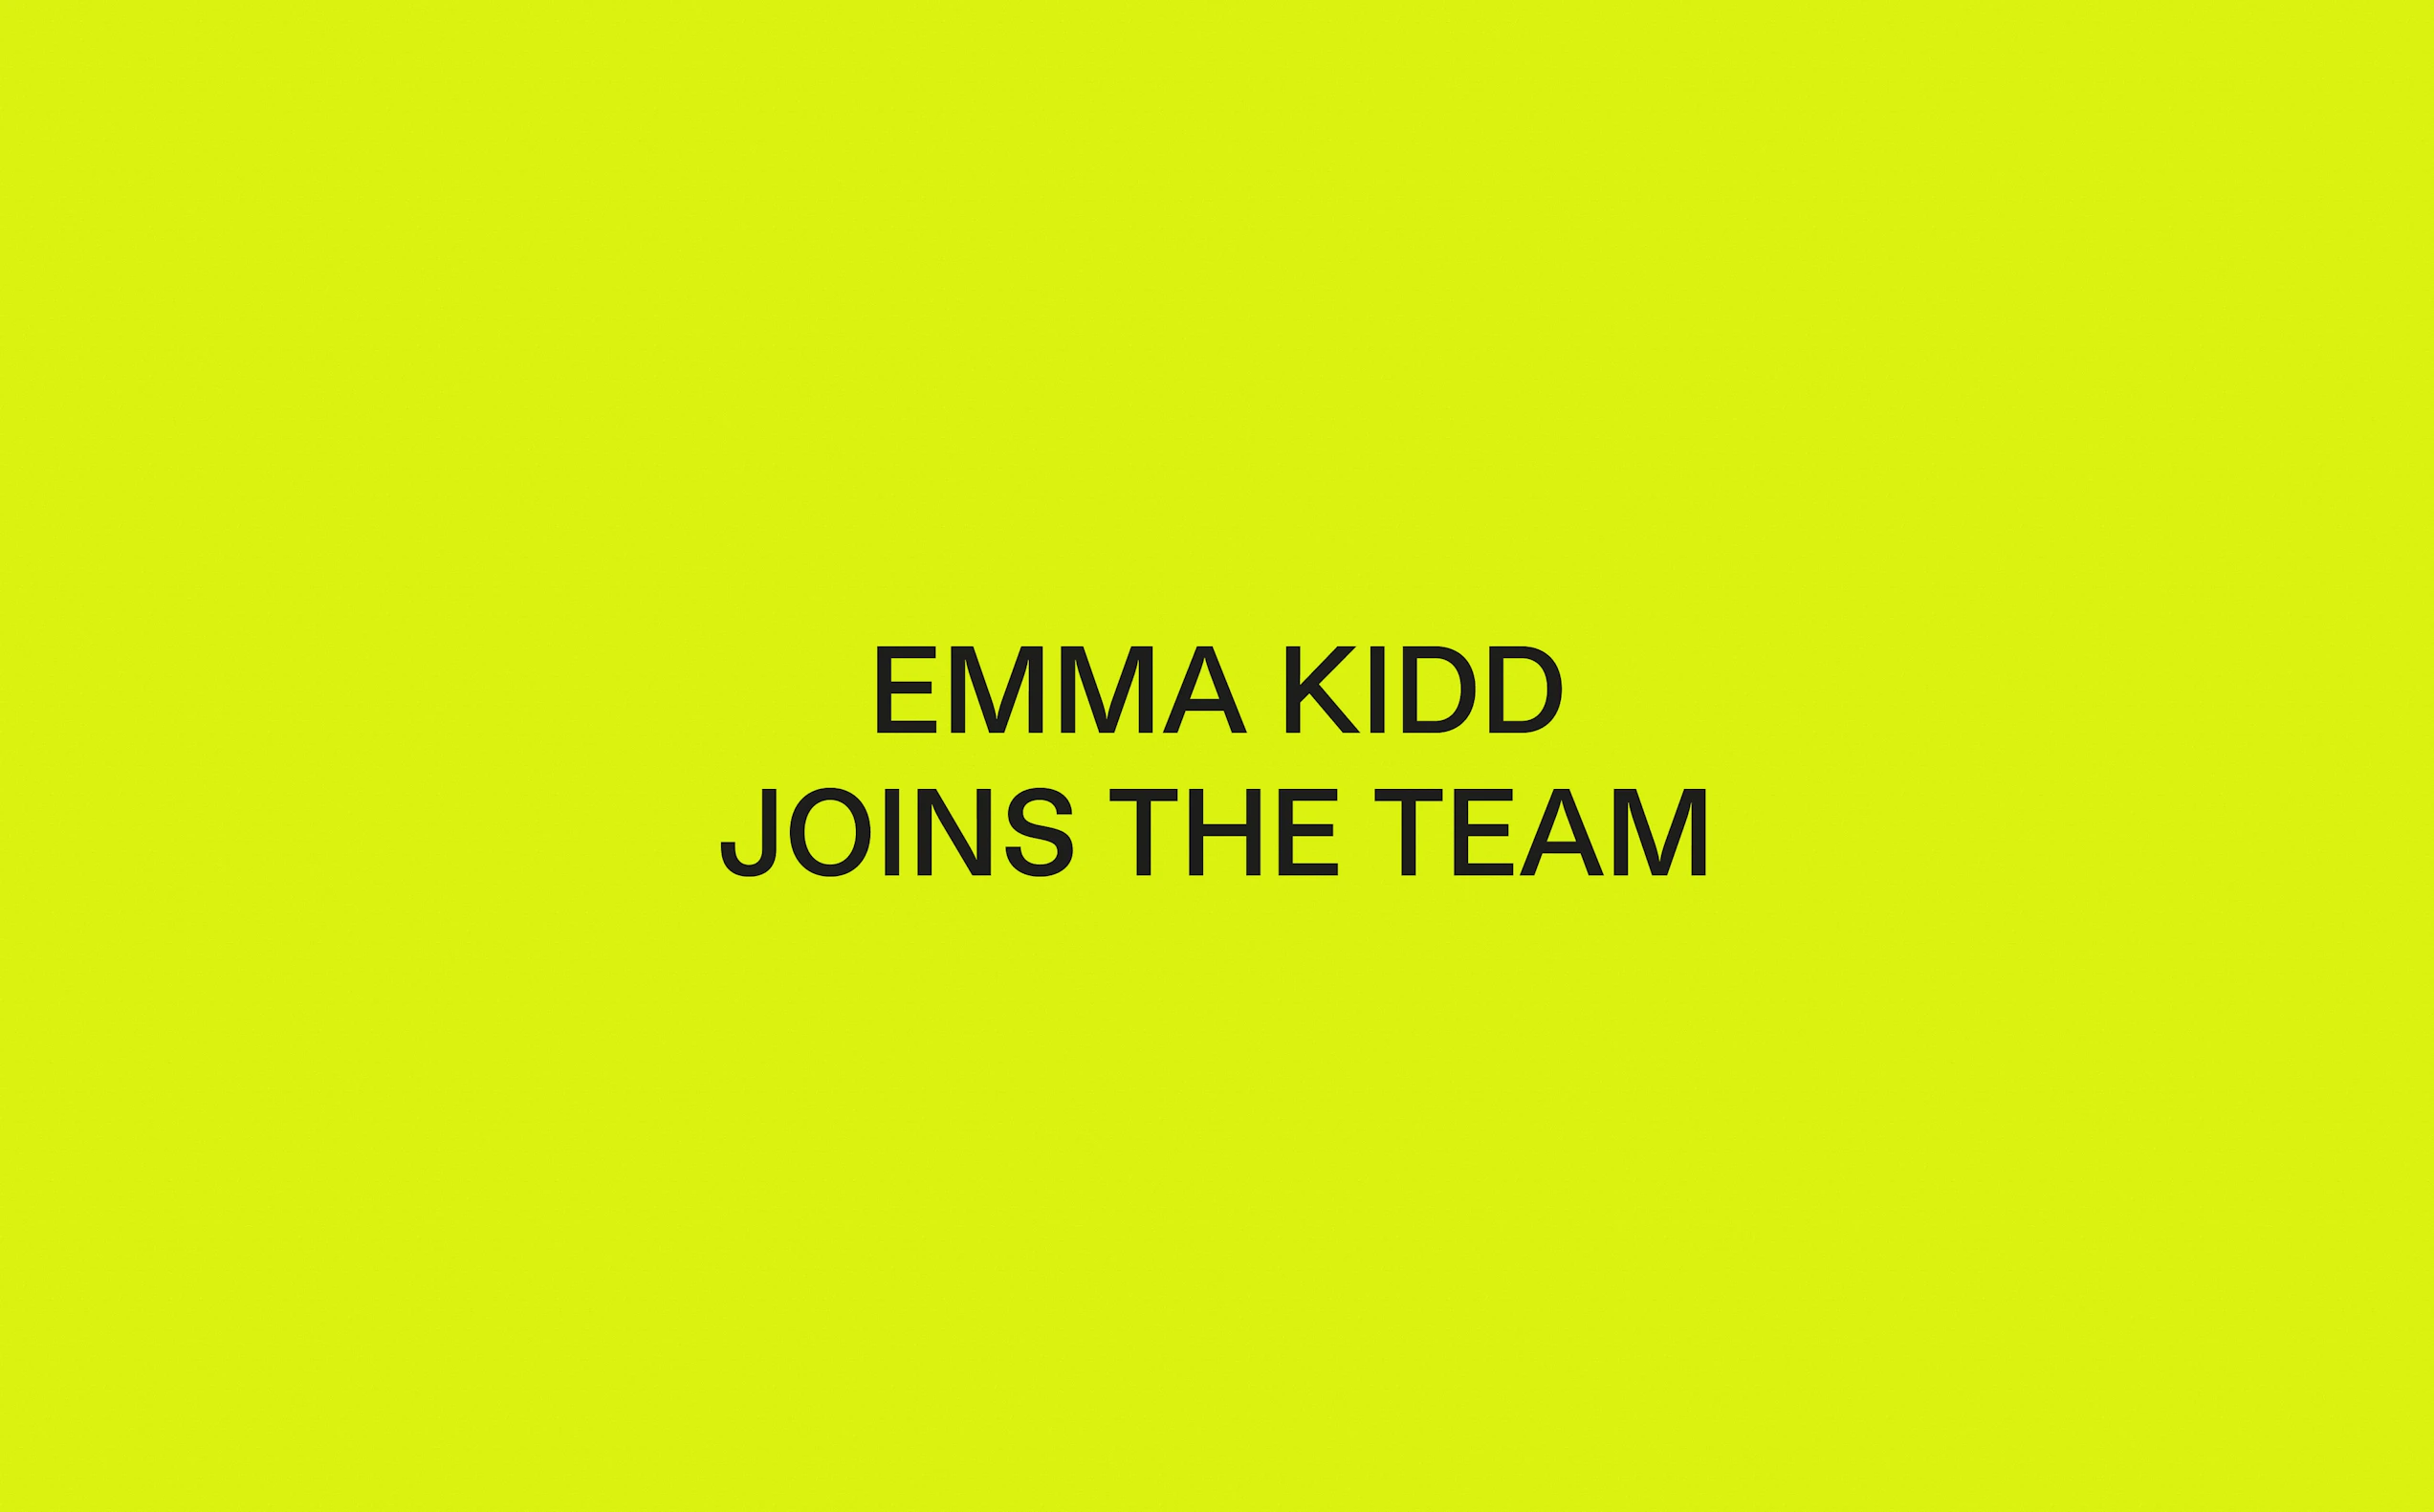 Cover Image for Emma Kidd joins the team